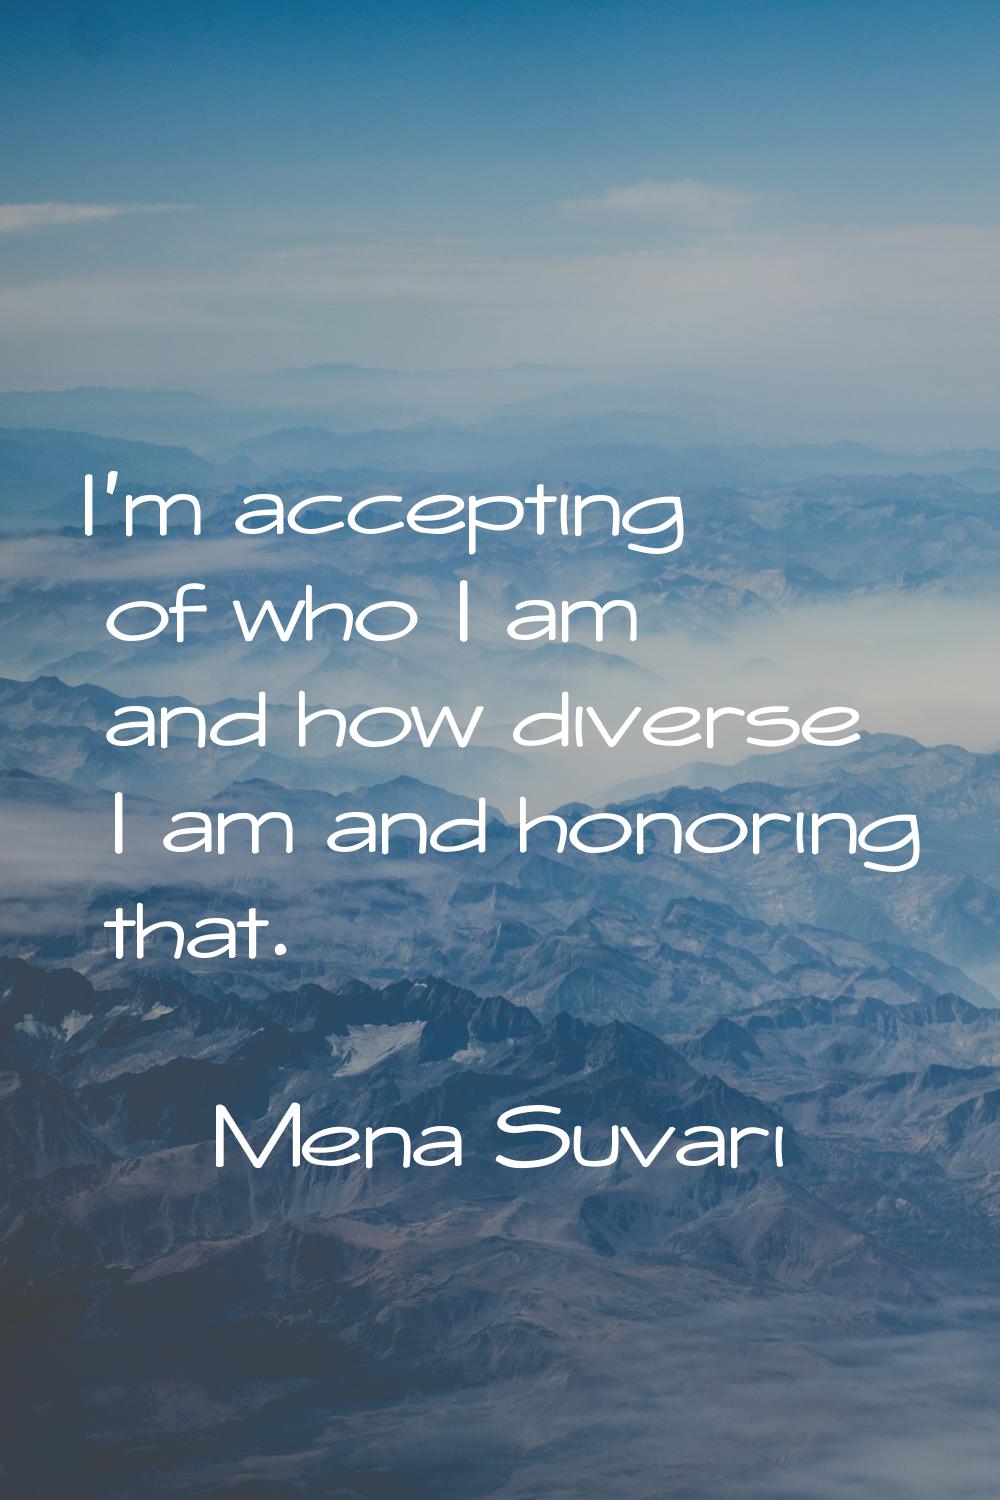 I'm accepting of who I am and how diverse I am and honoring that.